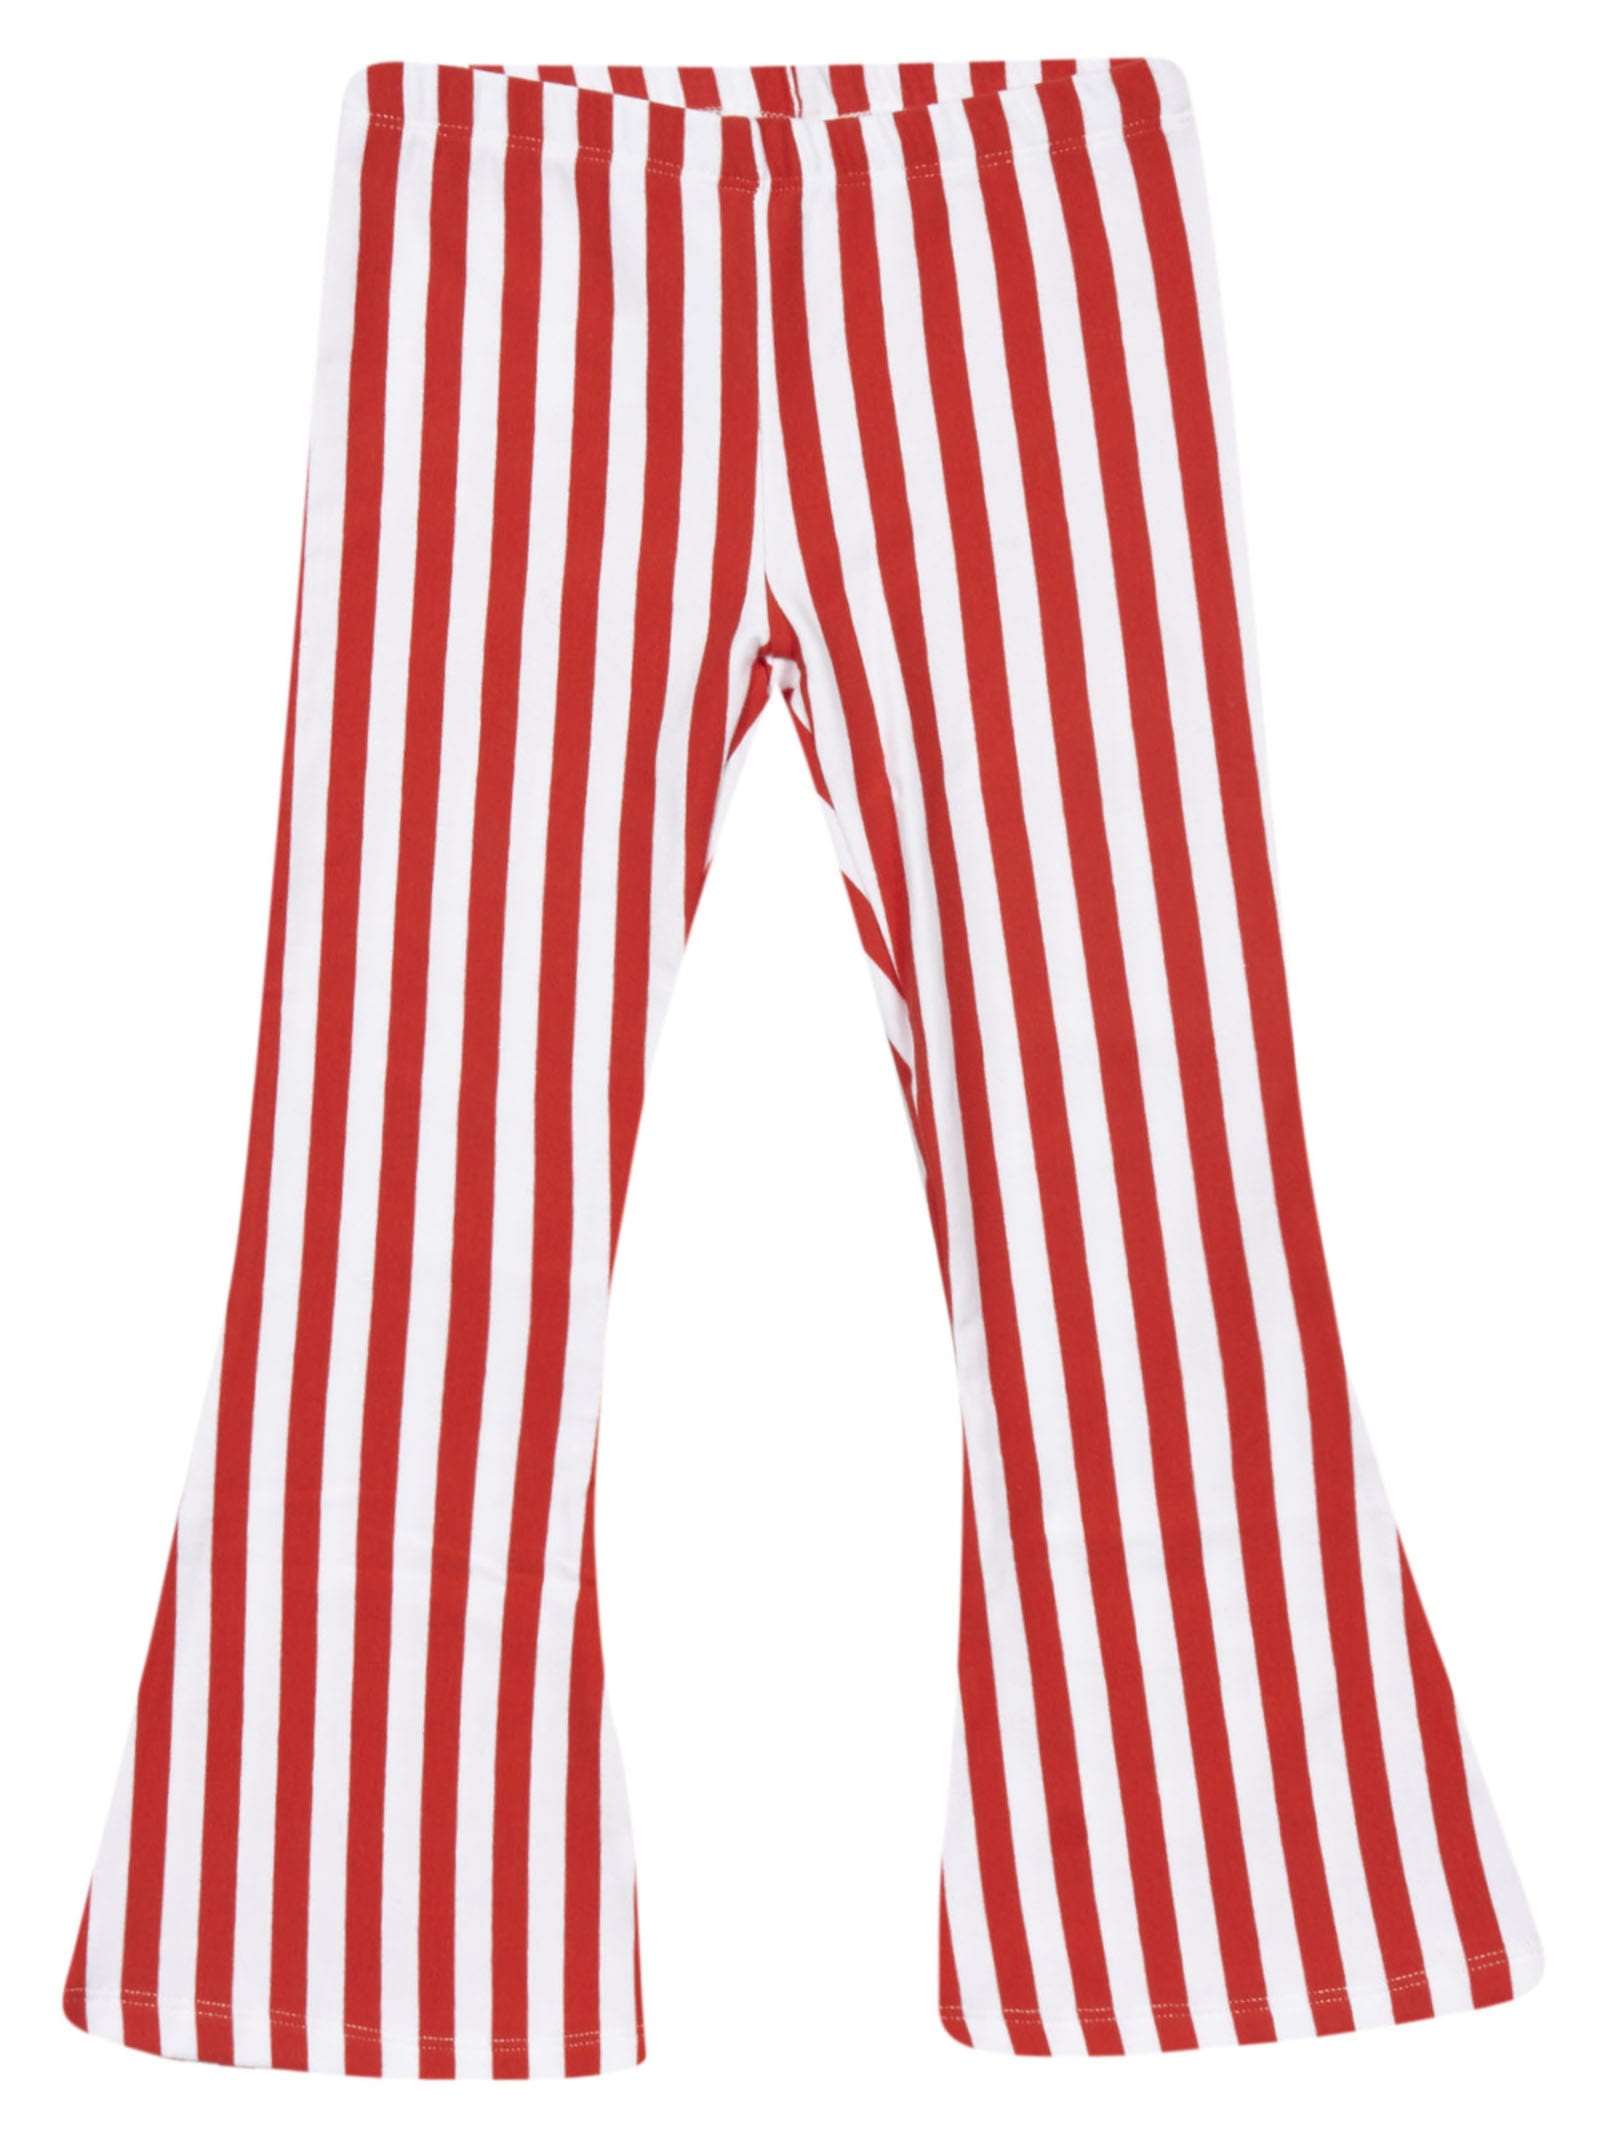 striped pants red and white